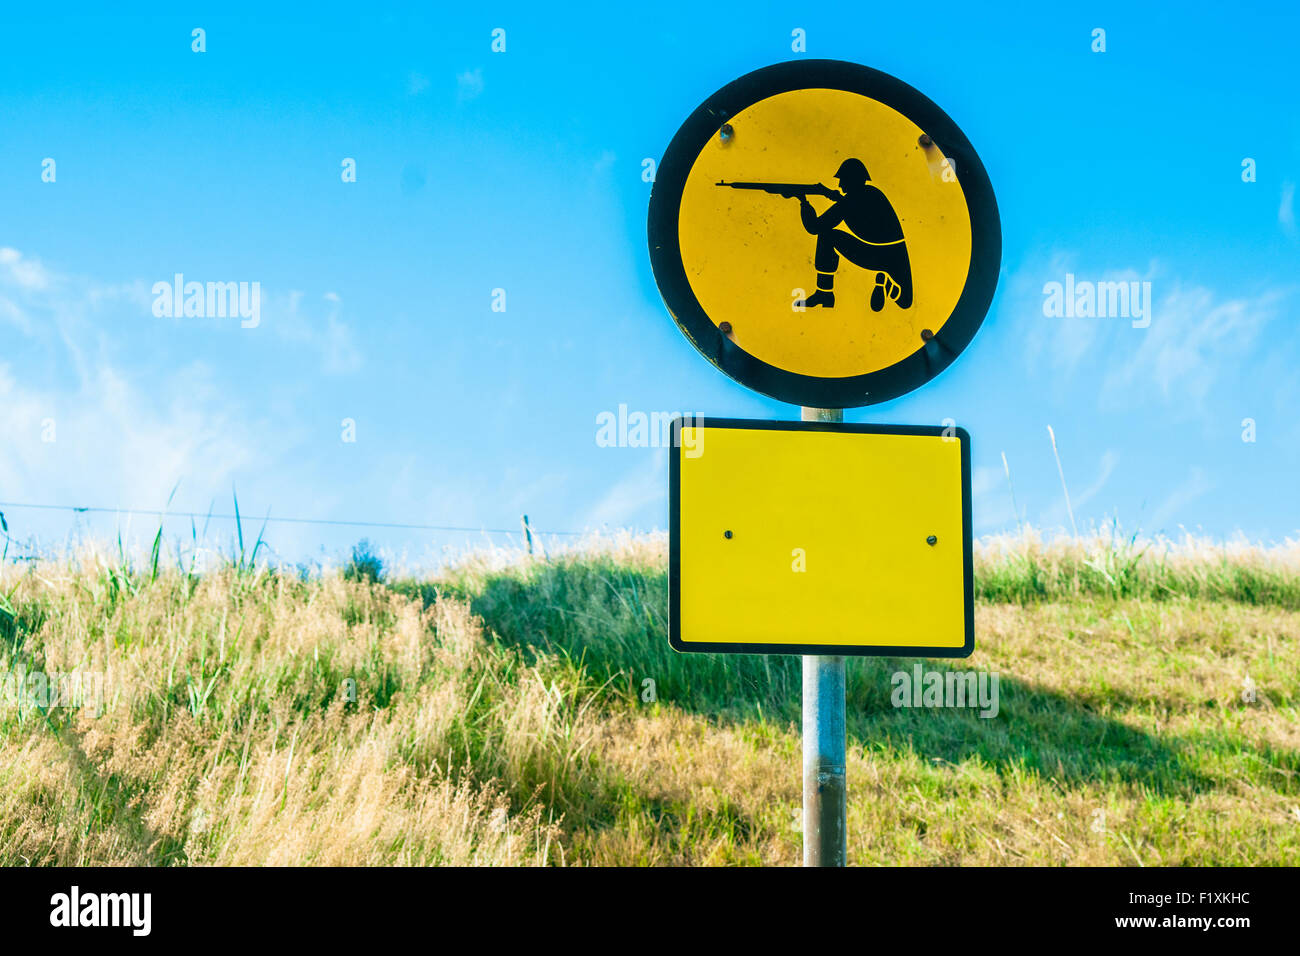 Shooting range sign in yellow color on a field Stock Photo